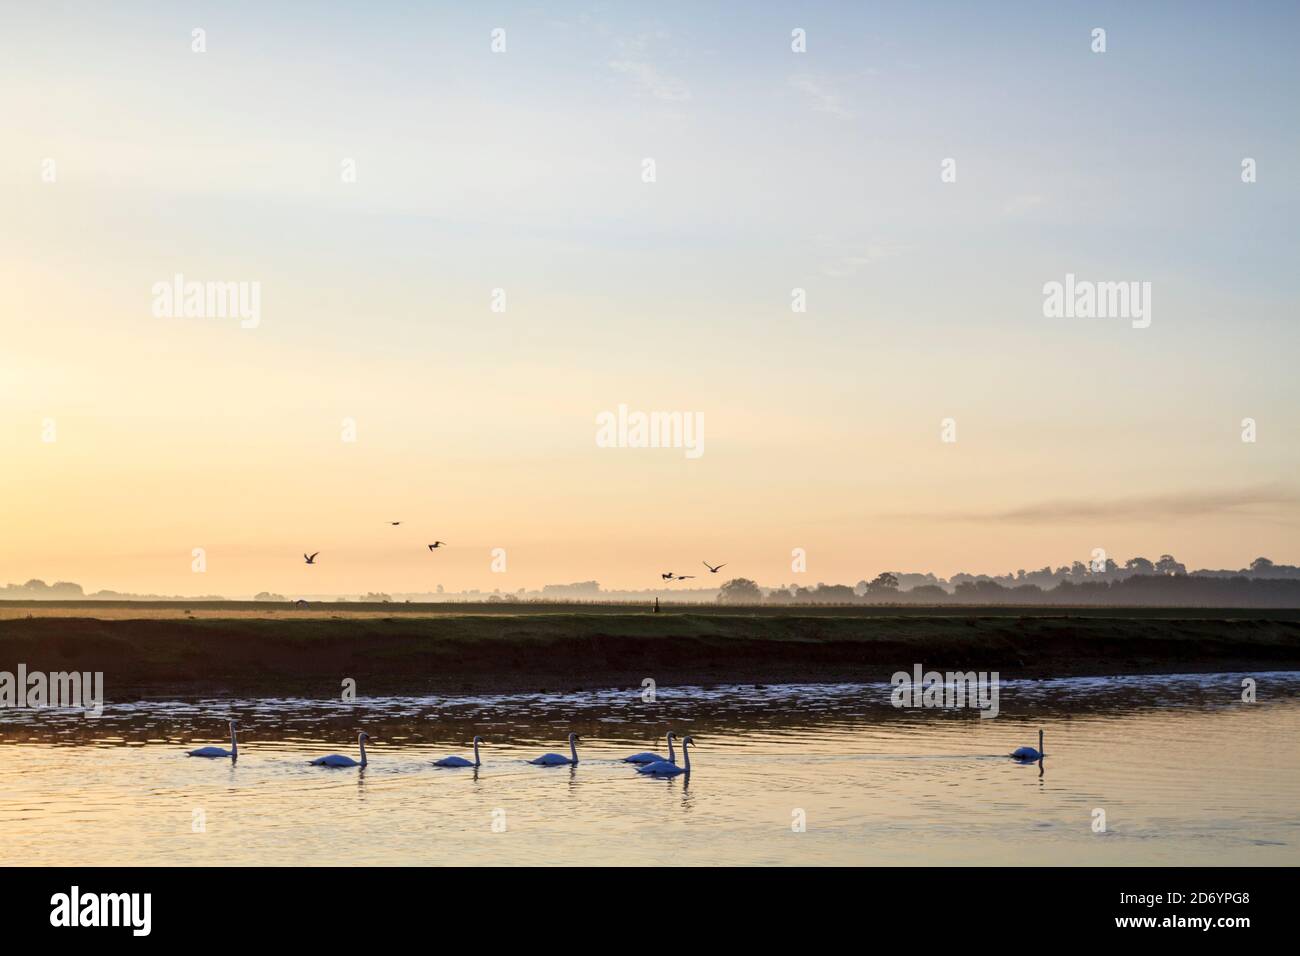 Early autumn landscape. Dawn sky with birds, and swans on the River Trent, Stoke Bardolph in the Nottinghamshire countryside, England, UK Stock Photo